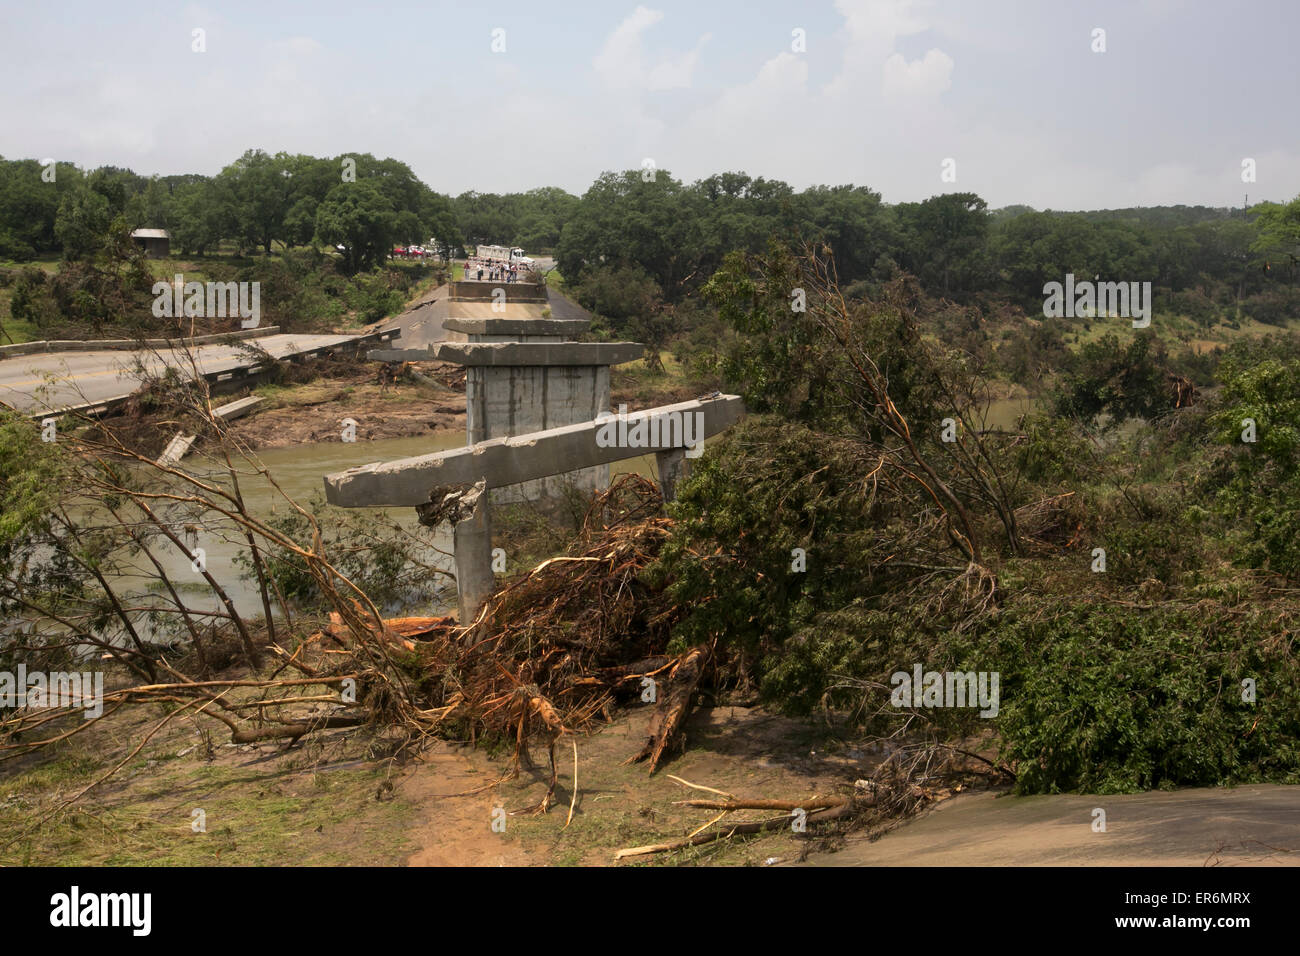 Wimberley, Texas, USA. 27th May, 2015. The Fischer Store Road bridge in Wimberley, Texas destroyed by floodwaters from the Blanco River over the Memorial Day holiday weekend. Stock Photo